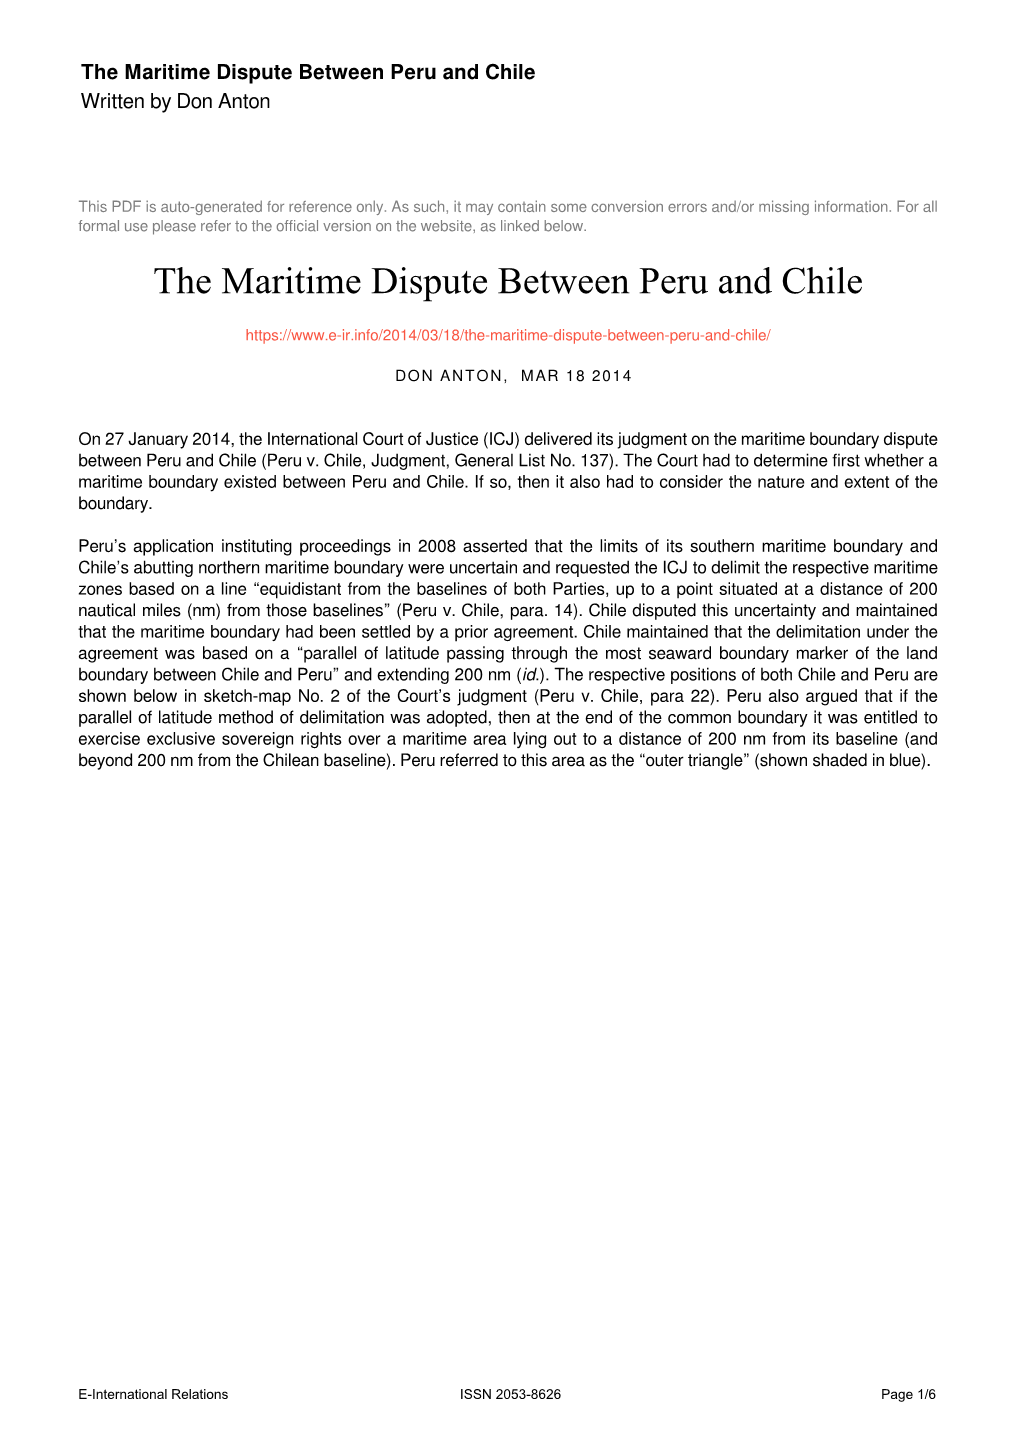 The Maritime Dispute Between Peru and Chile Written by Don Anton